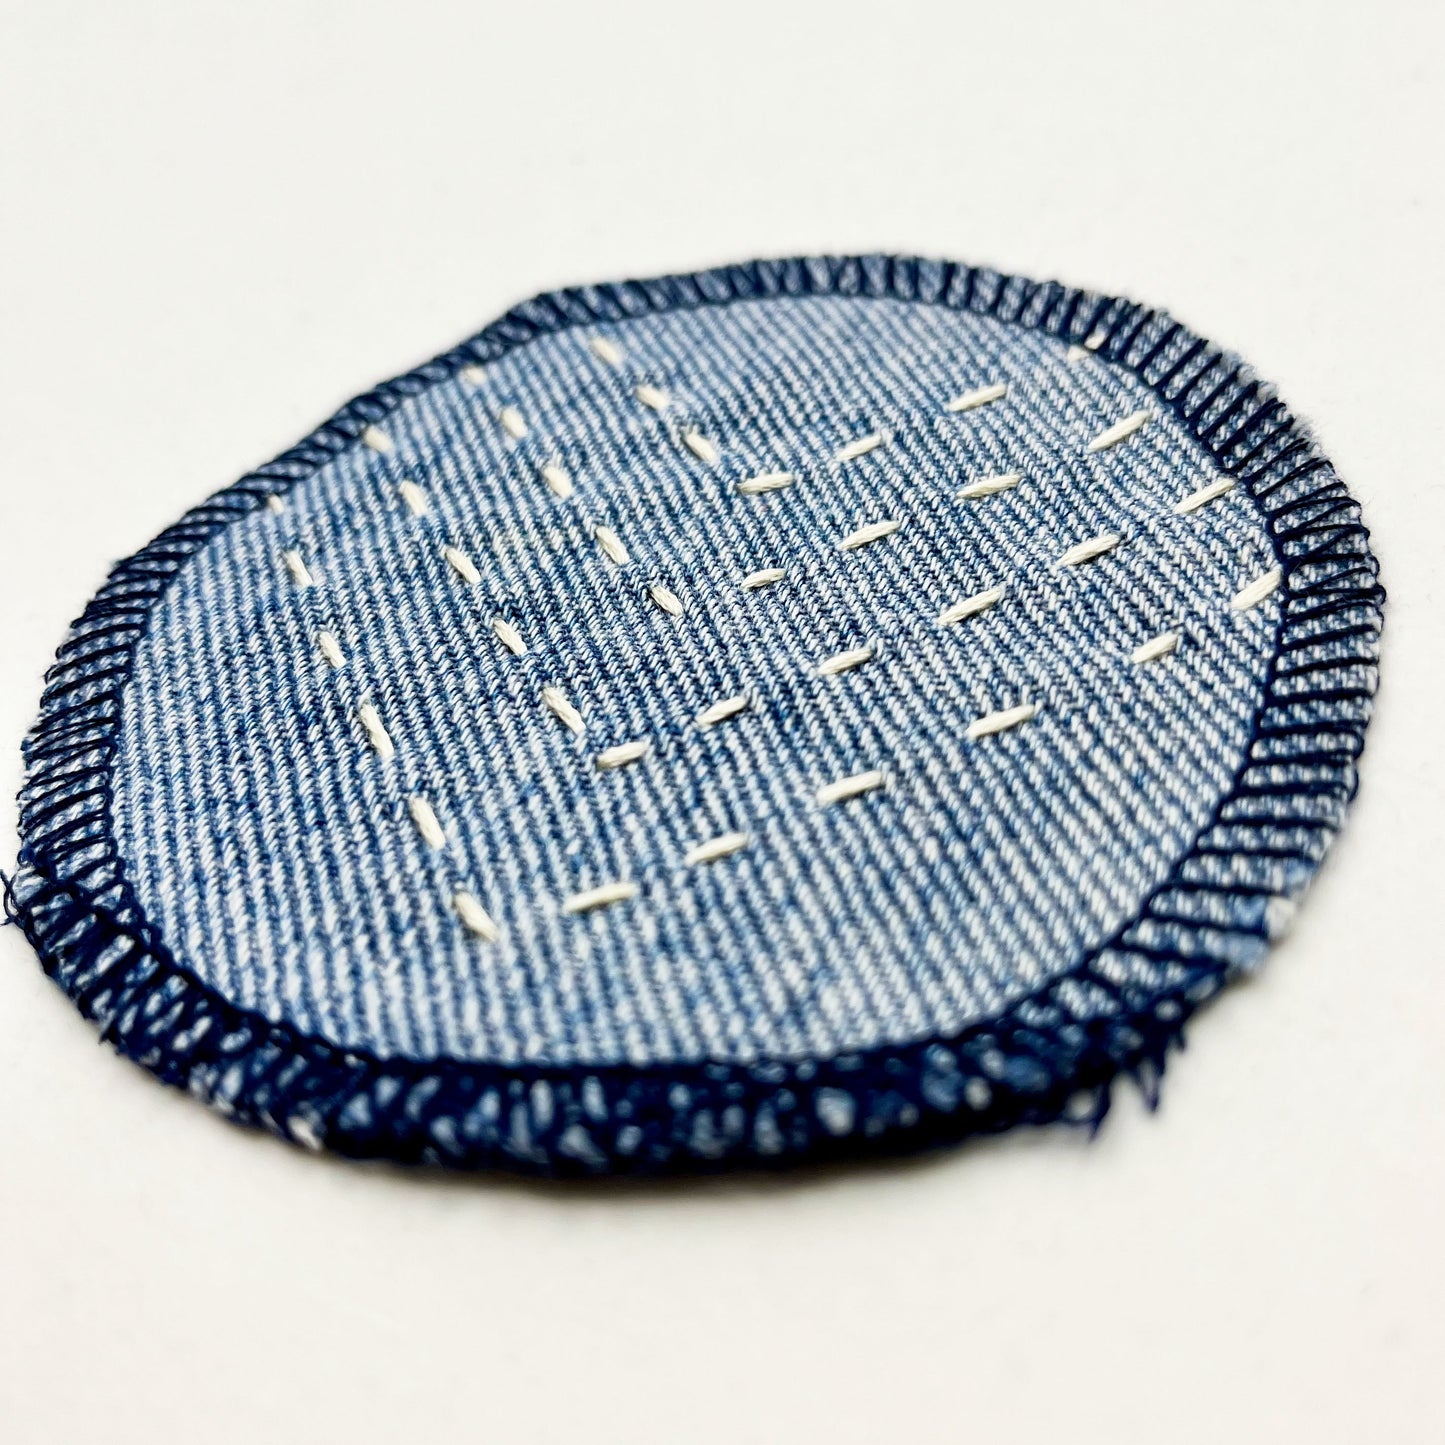 close up angled view of a circle shaped patch made out of denim, with overlocked edges, with rows of ivory running stitches in a chevron pattern, on a white background